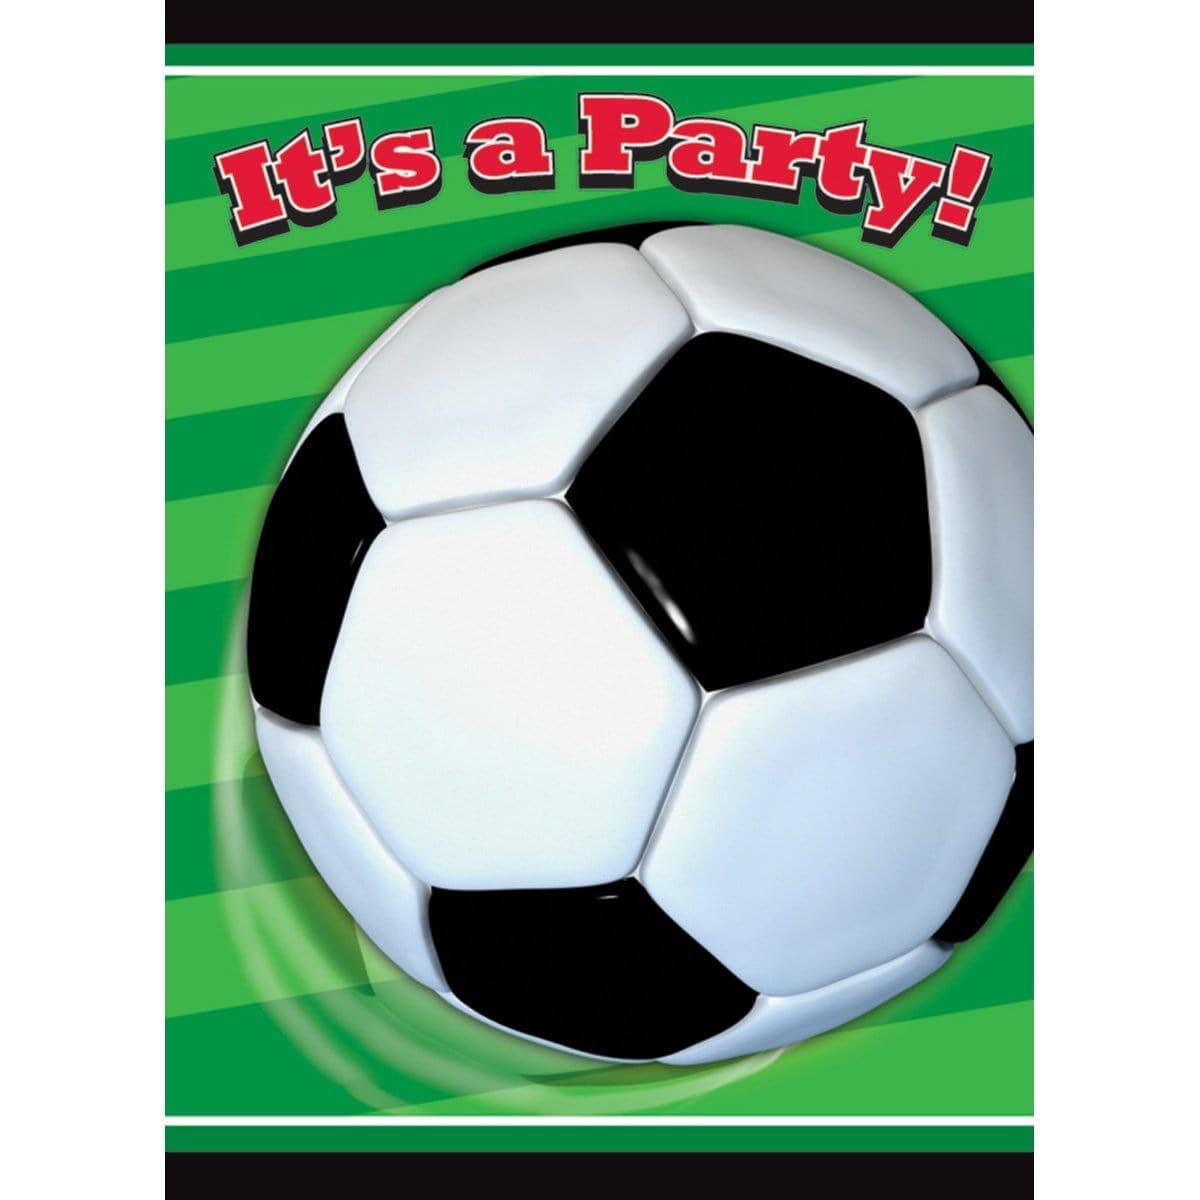 Buy Theme Party 3D Soccer Invitations, 8 per Package sold at Party Expert